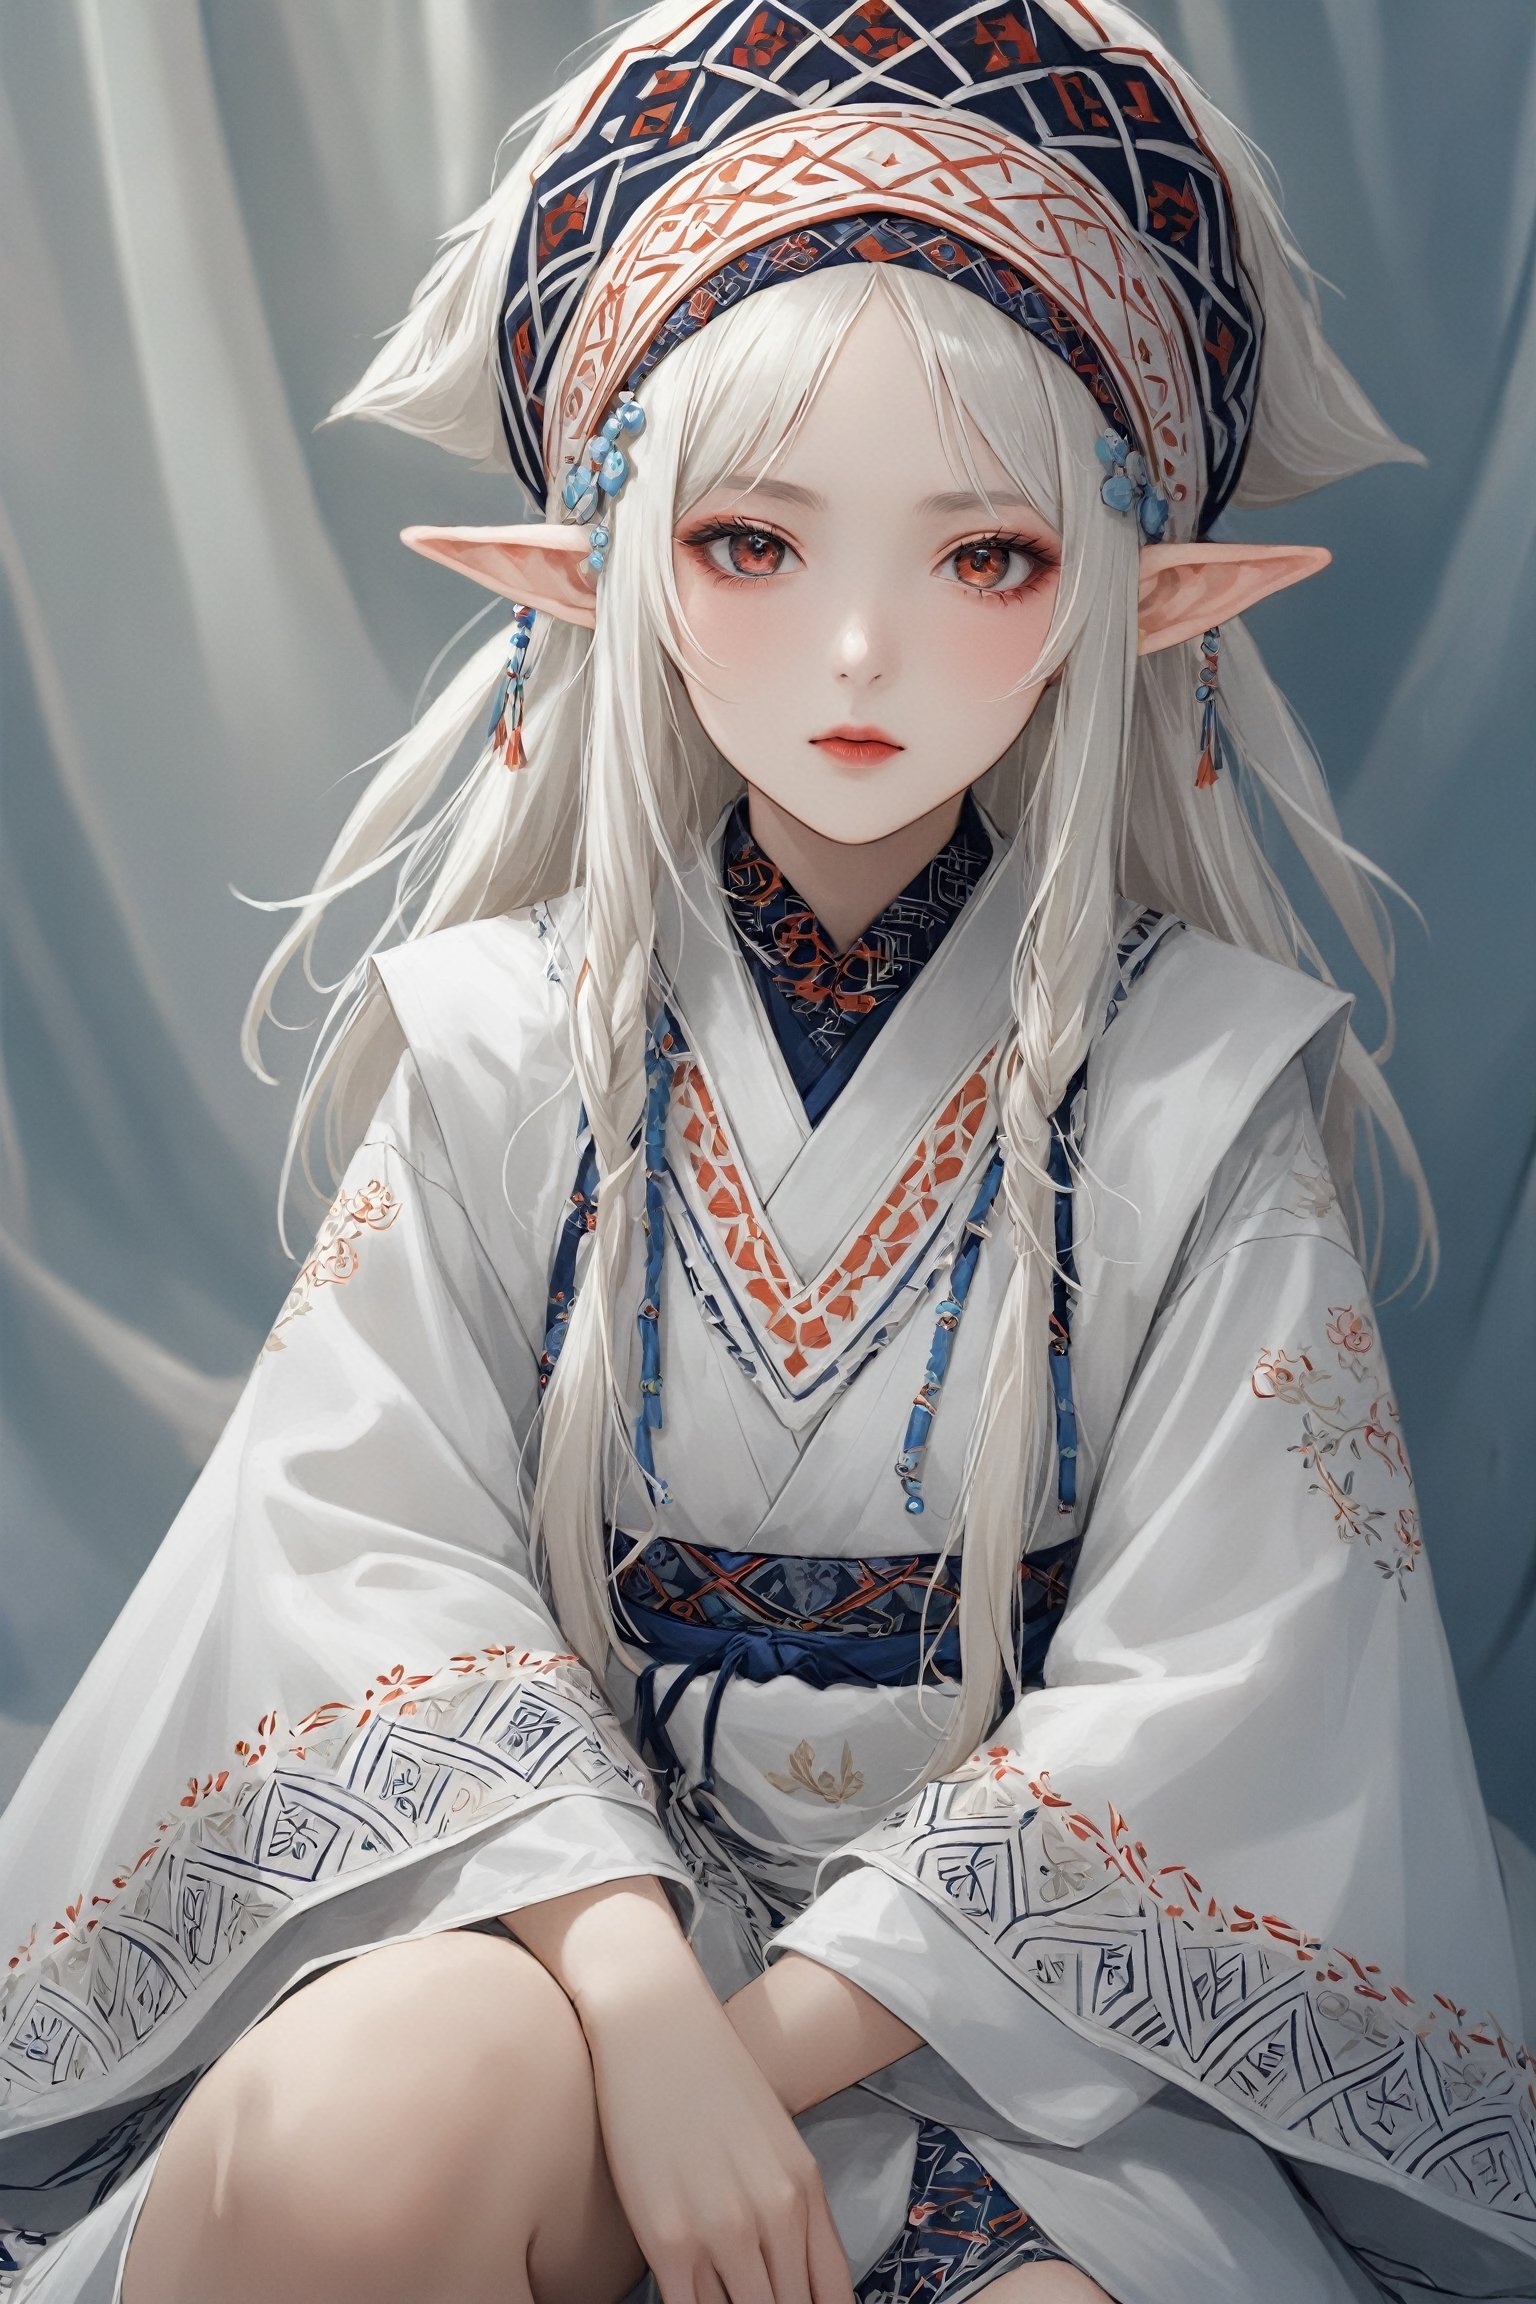  a beautiful Albino elf girl,elf ear, wearing traditional Ainu attire, adorned with intricate embroidery and patterns symbolizing Ainu culture, Her garments include a dress and apron,Completing her look is a unique headpiece that enhances her beauty,With pride in Ainu culture,Misery Stentrem,Nina Aslato